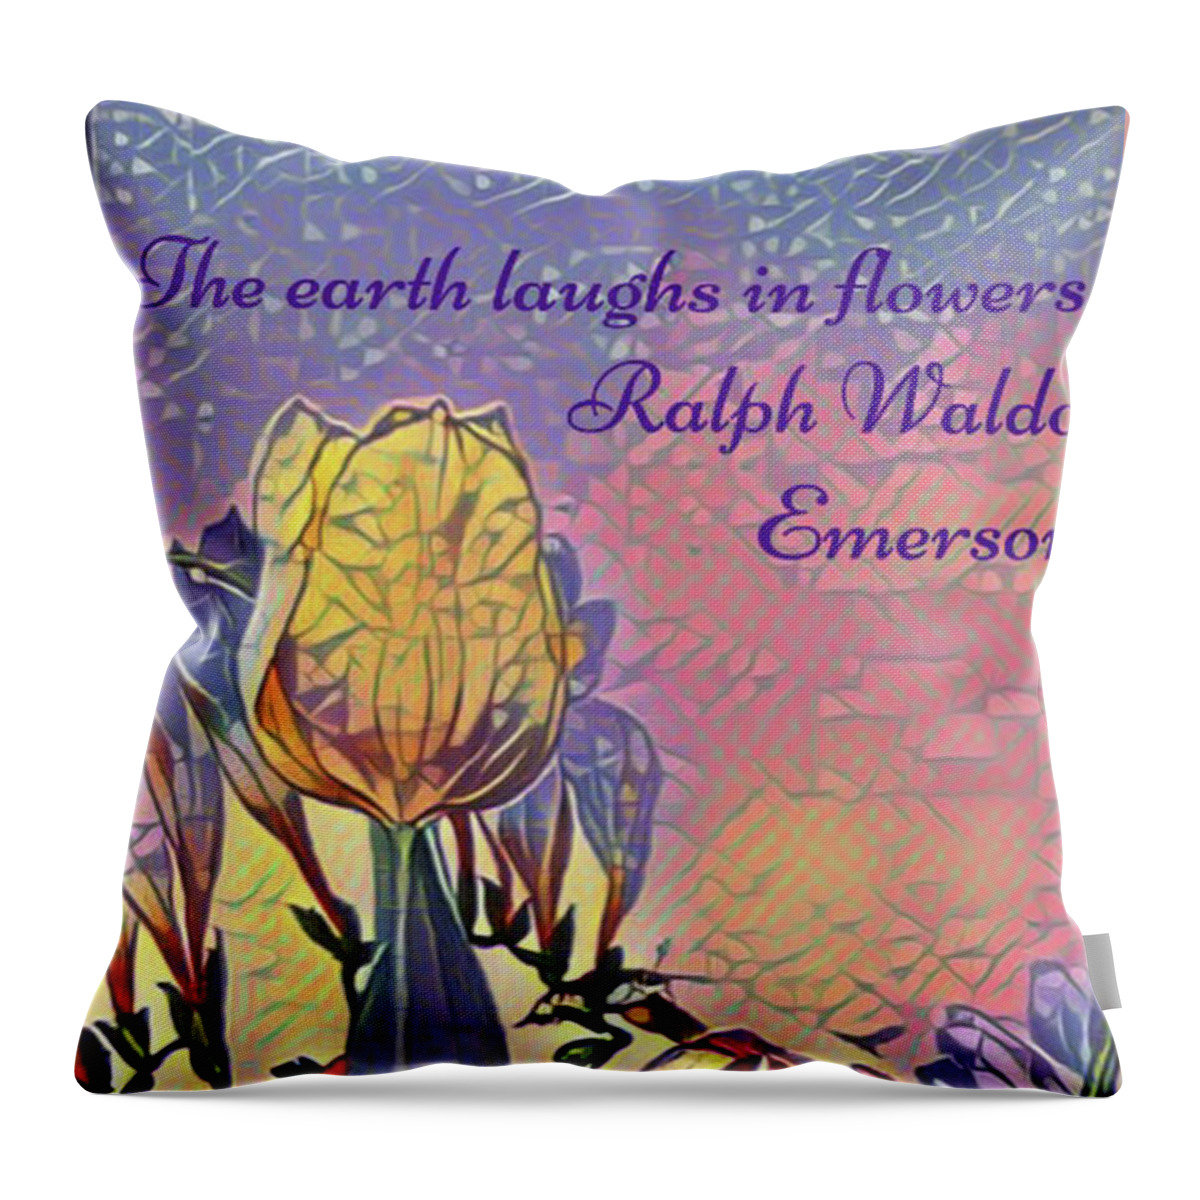 Emerson Throw Pillow featuring the digital art The earth laughs in flowers by Jackie MacNair